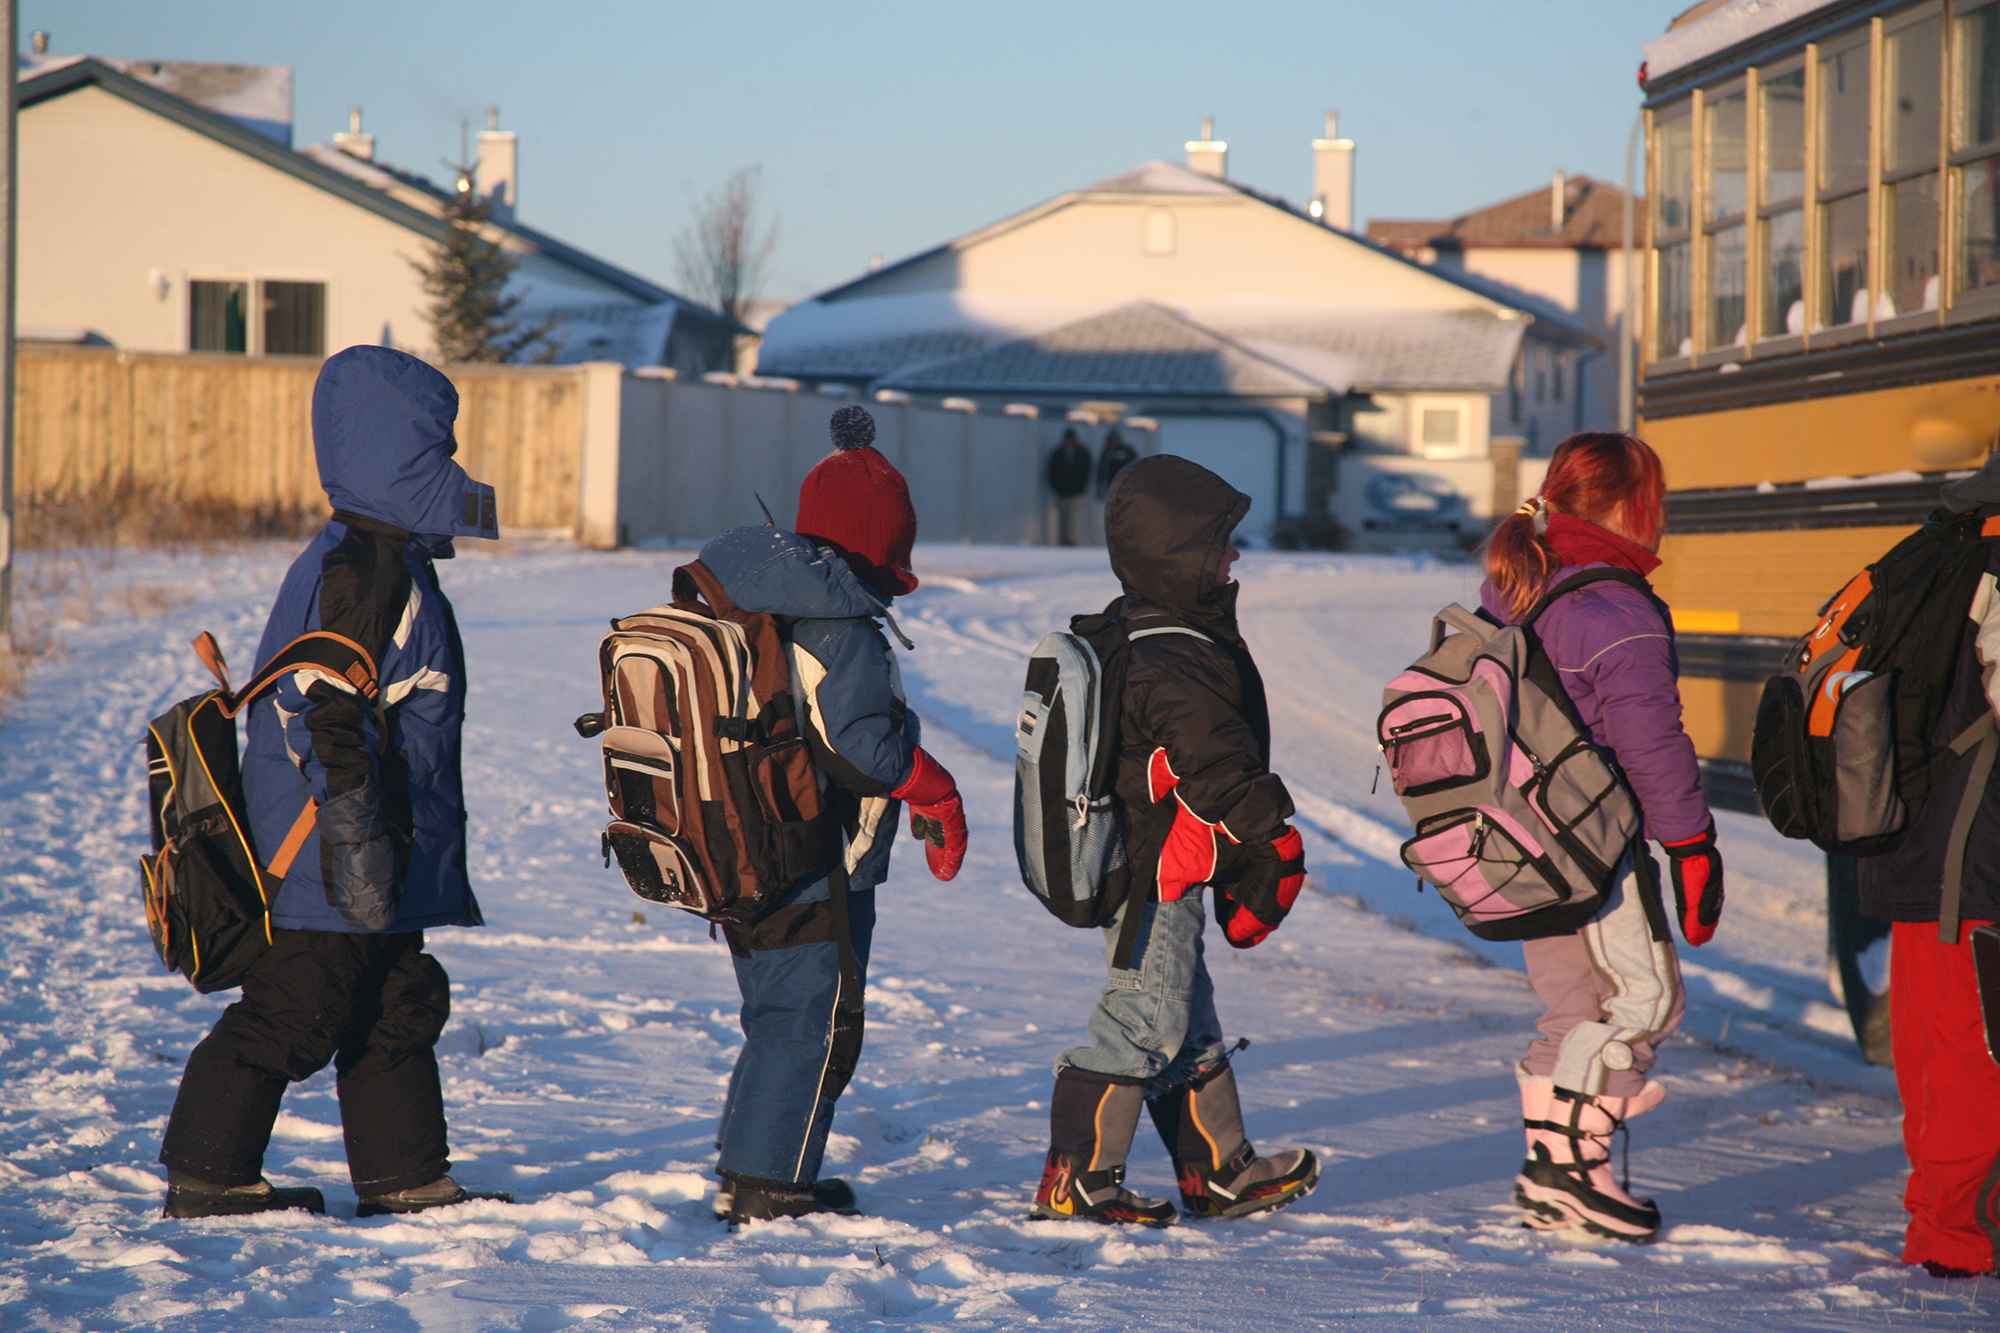 Cold children line up to board school bus in January.